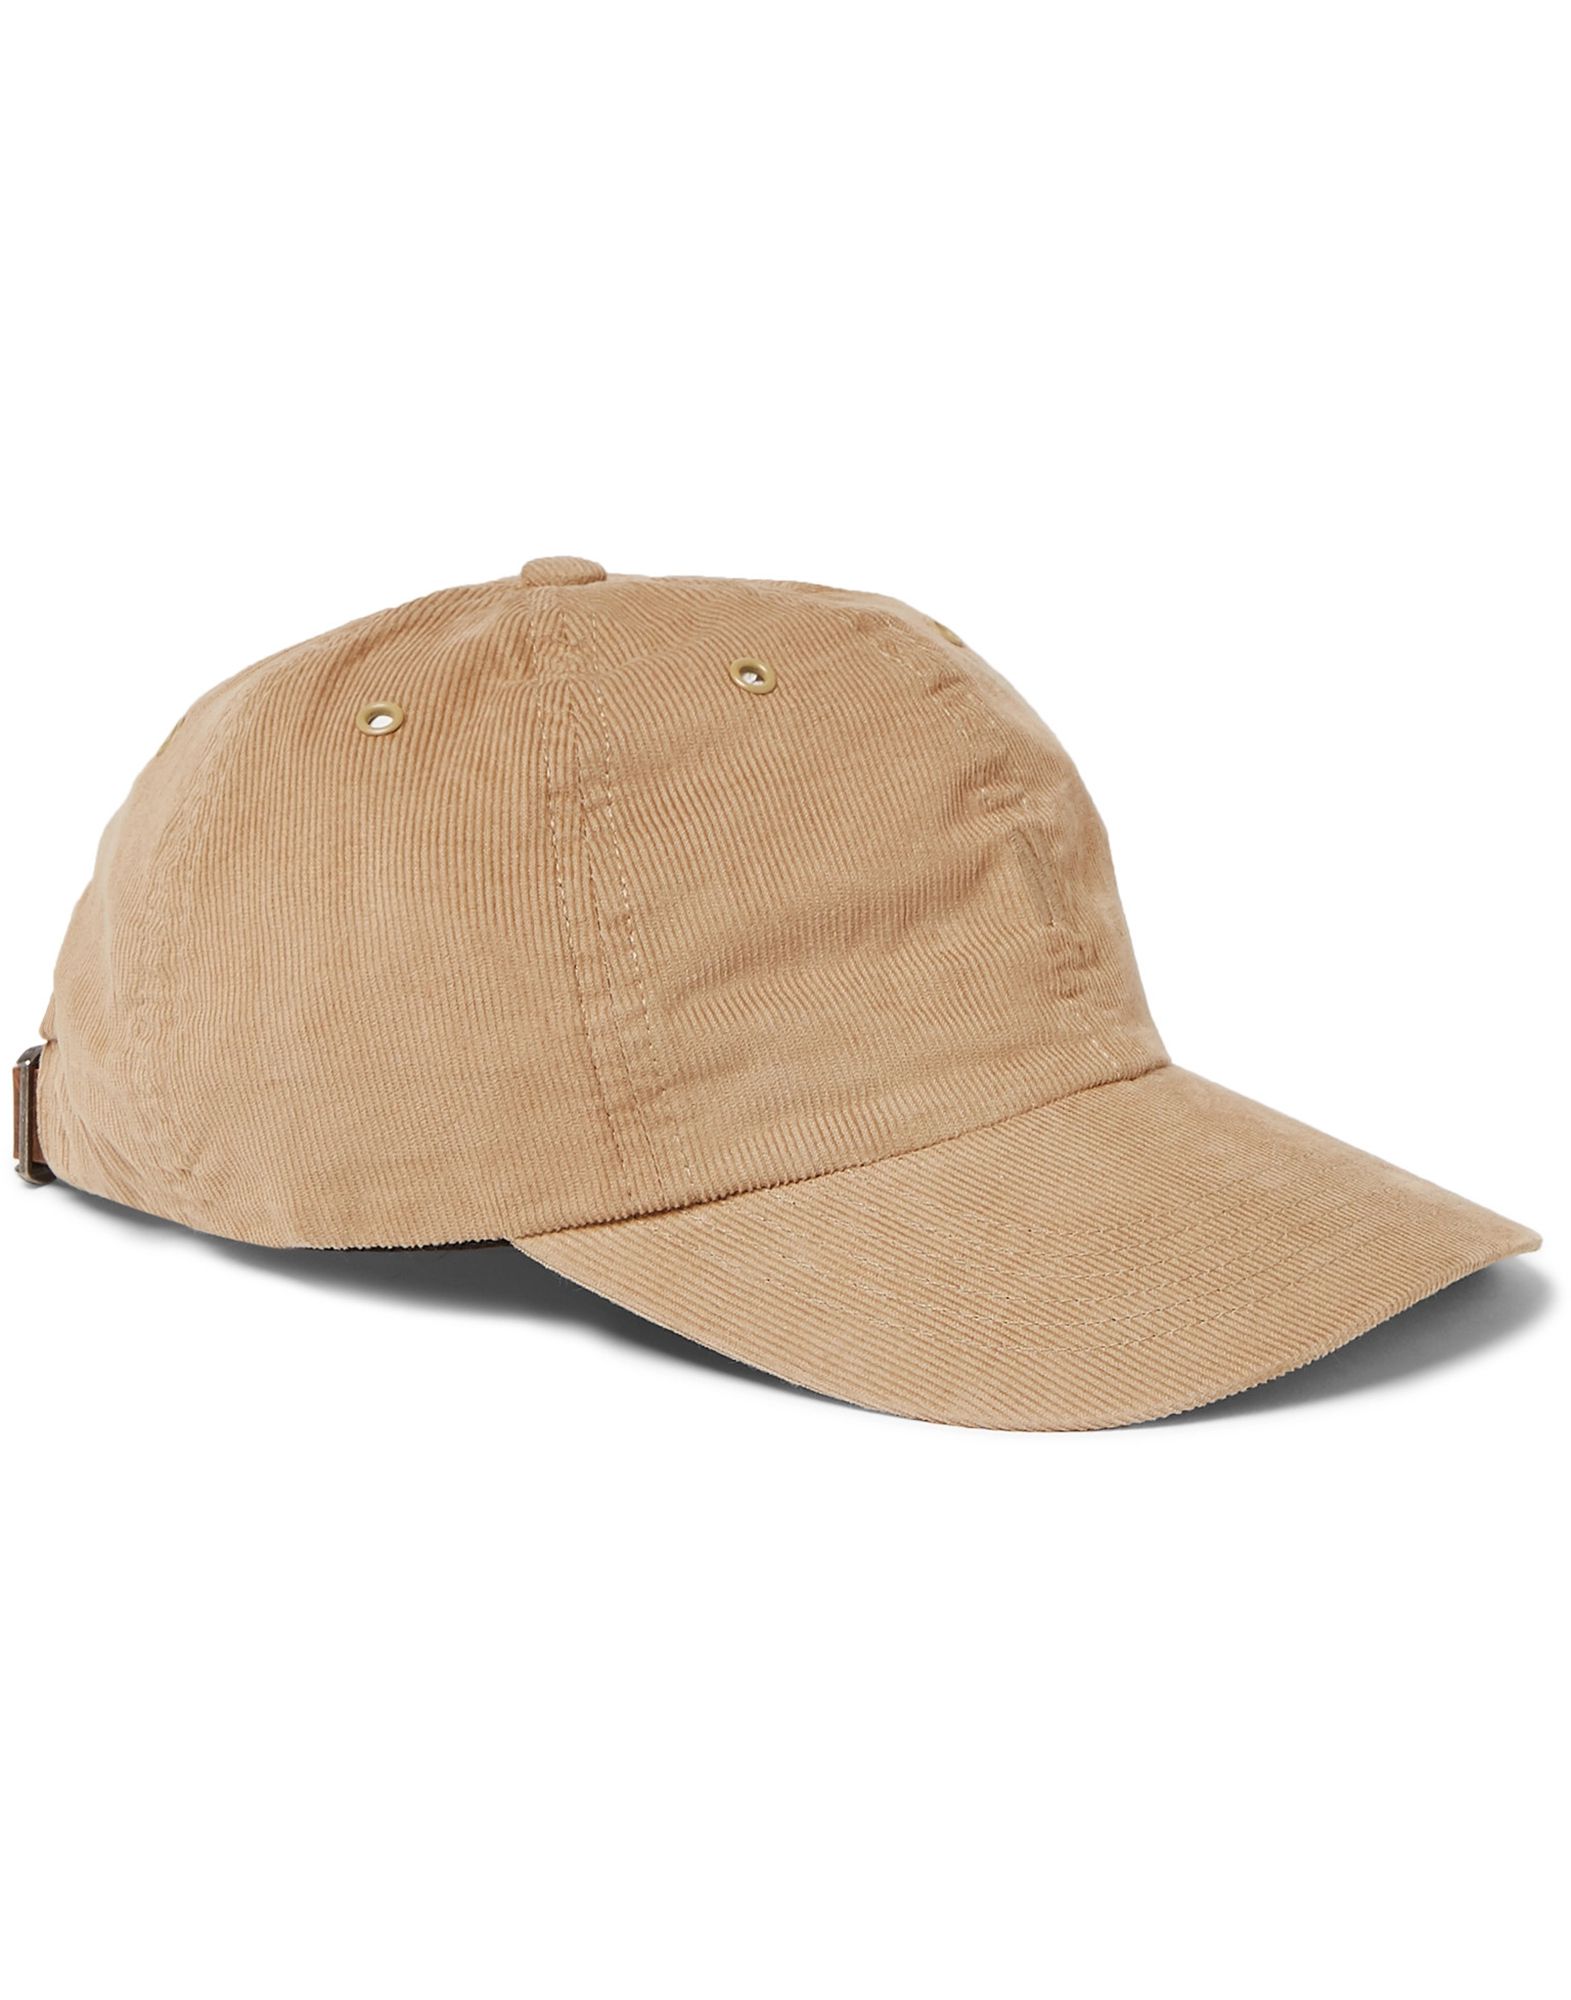 NORSE PROJECTS Hats - Item 46713238